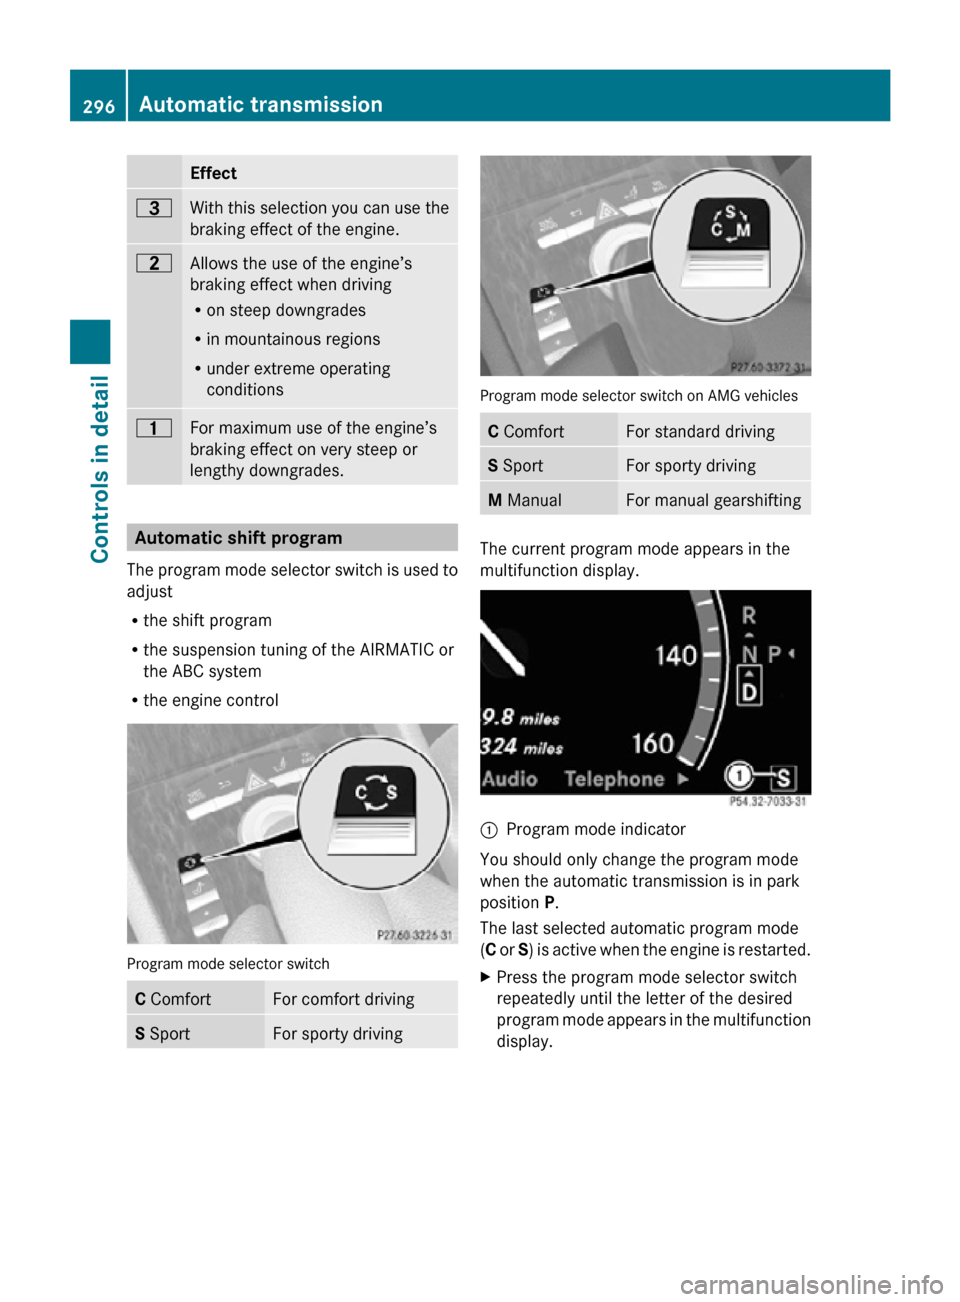 MERCEDES-BENZ CL550 2010 W216 Owners Manual Effect
=
With this selection you can use the
braking effect of the engine.
5
Allows the use of the engine’s
braking effect when driving
R
on steep downgrades
R in mountainous regions
R under extreme